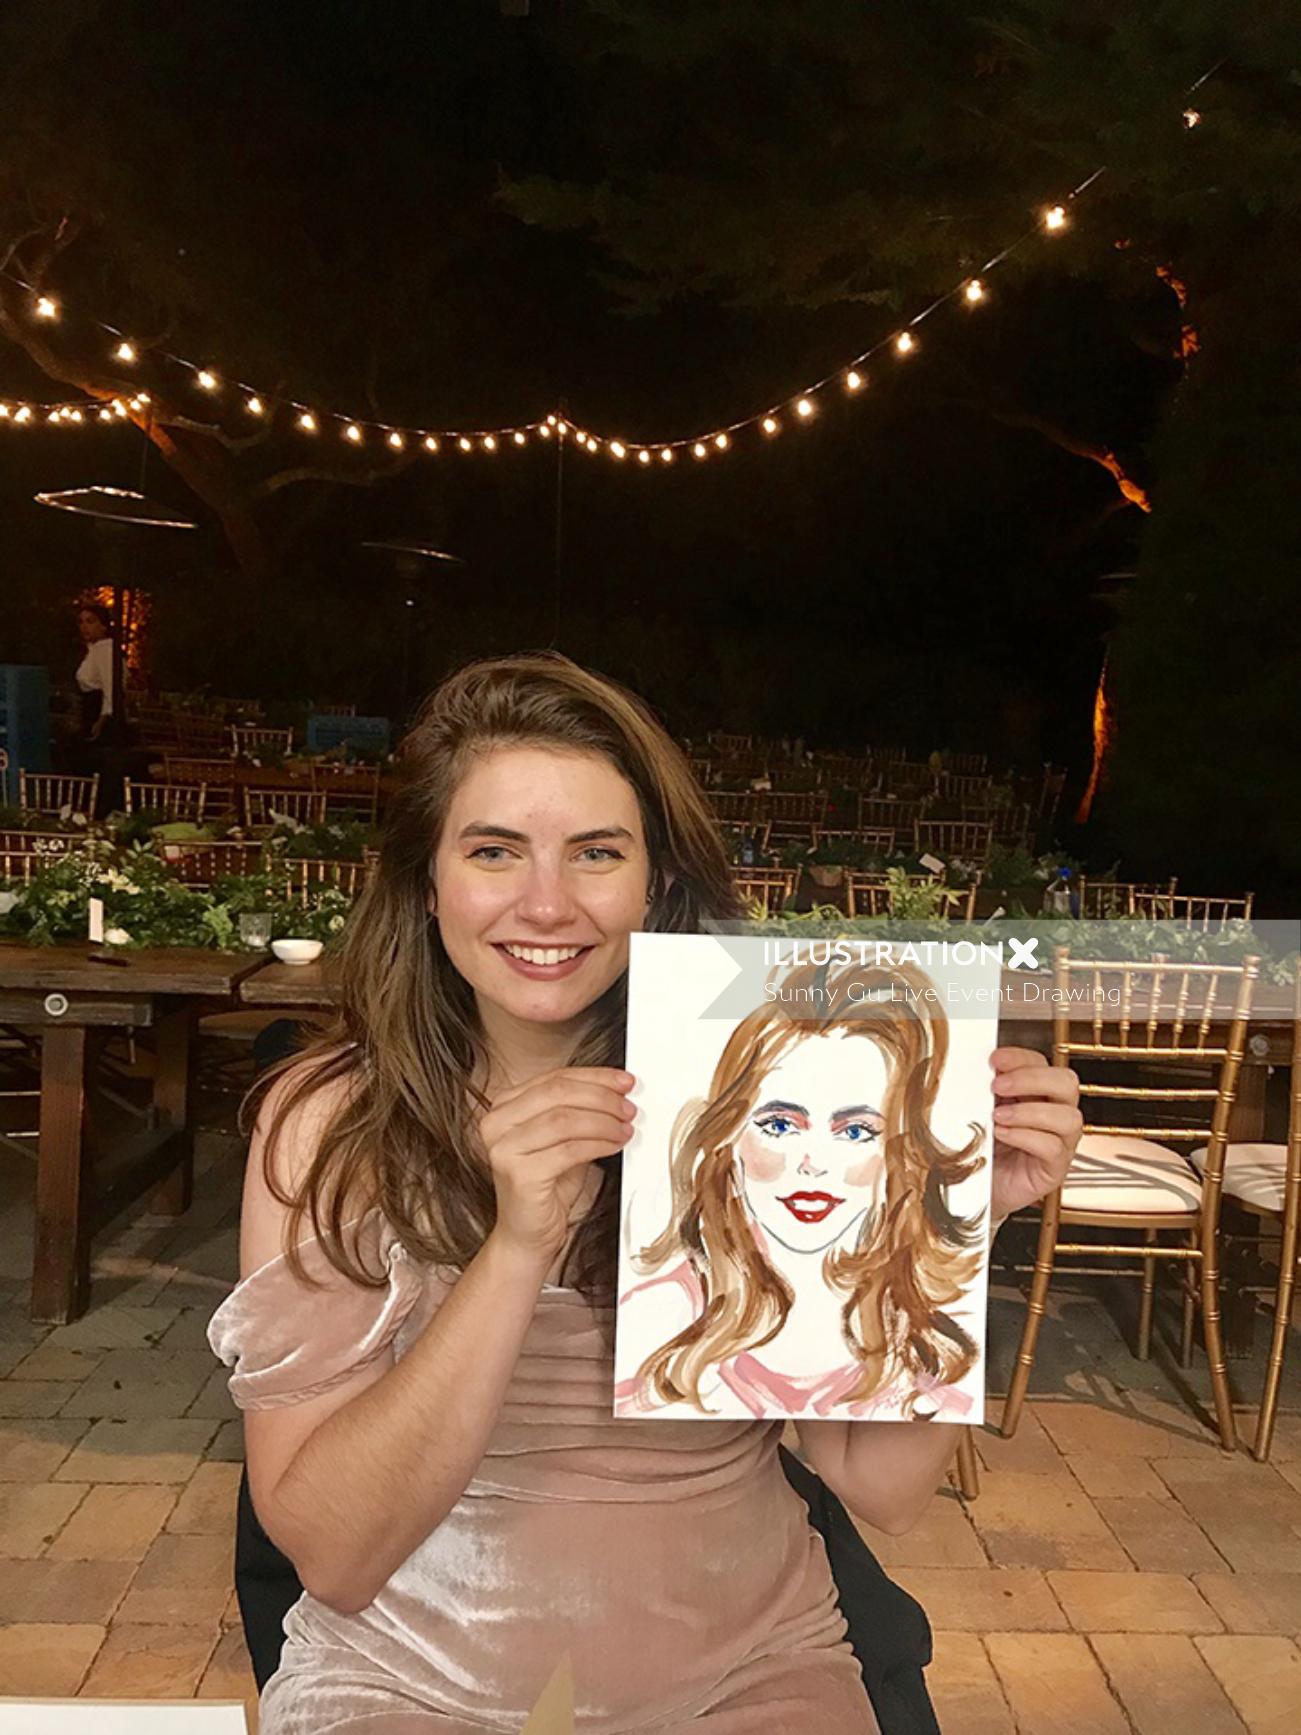 Live event drawing of woman with her painting
